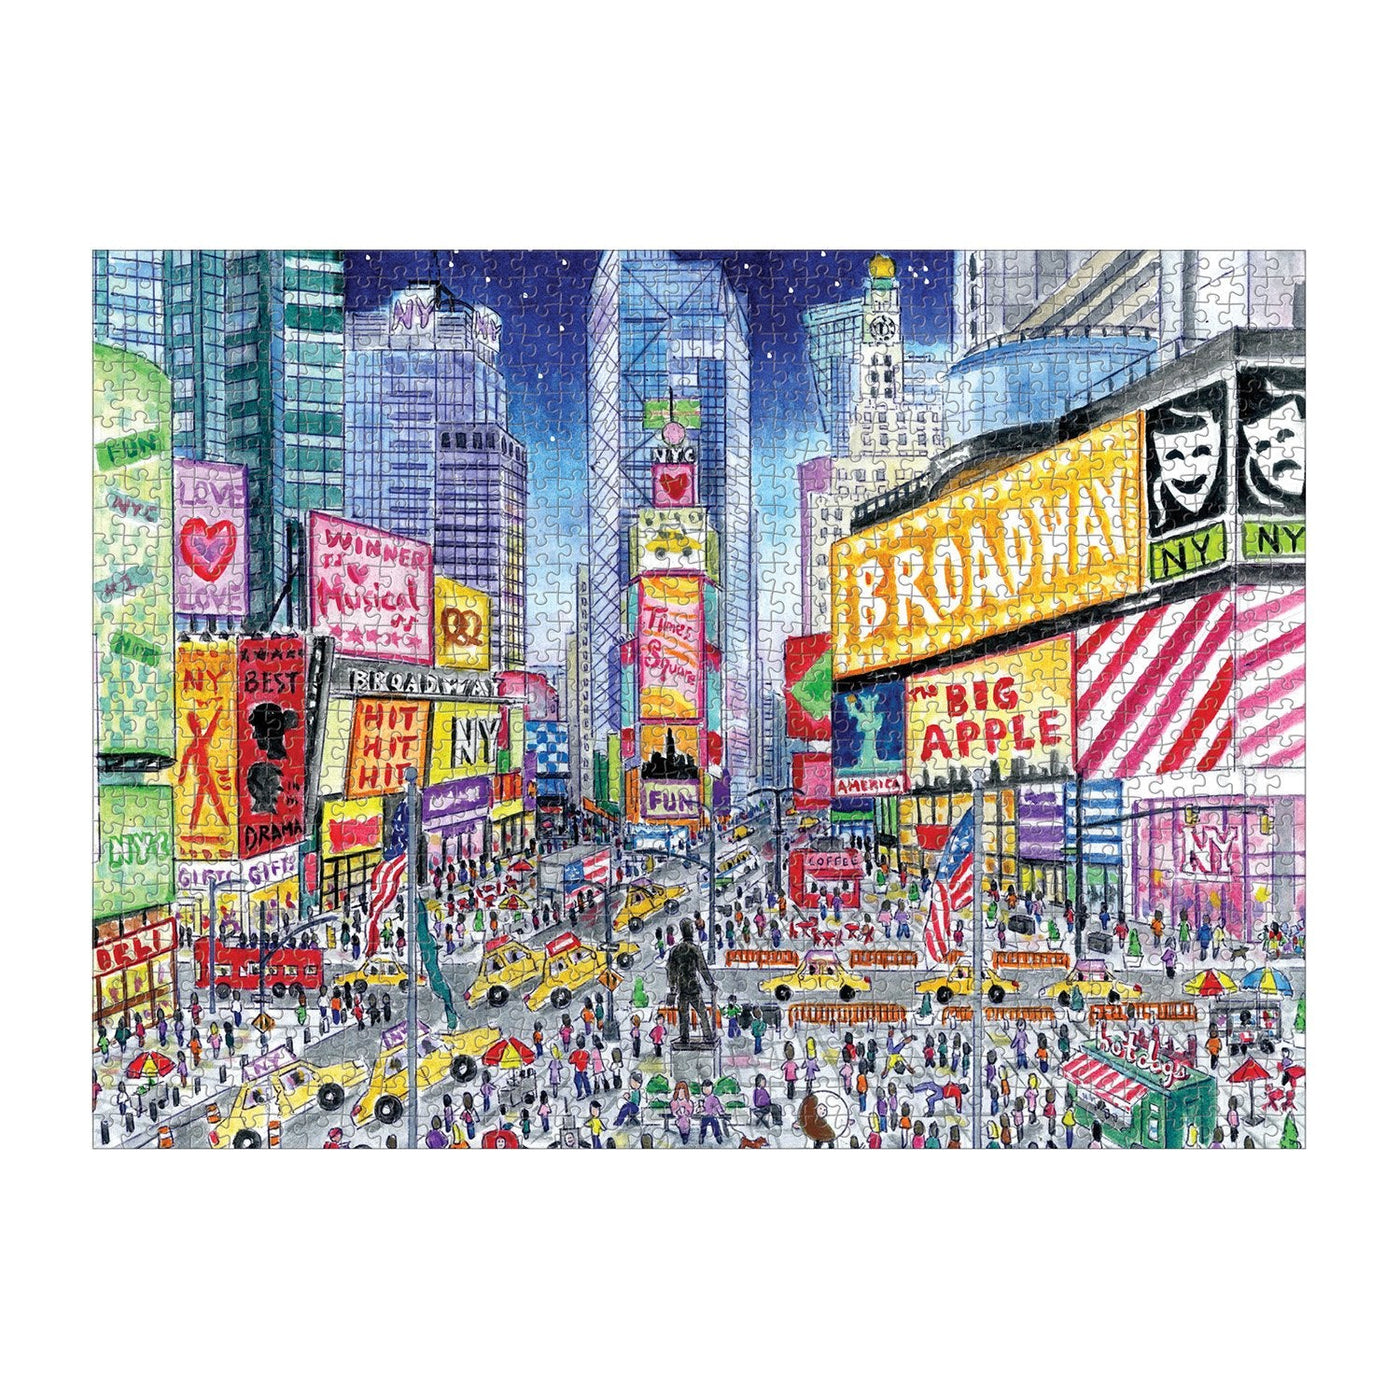 Michael Storrings Times Square | 1,000 Piece Jigsaw Puzzle